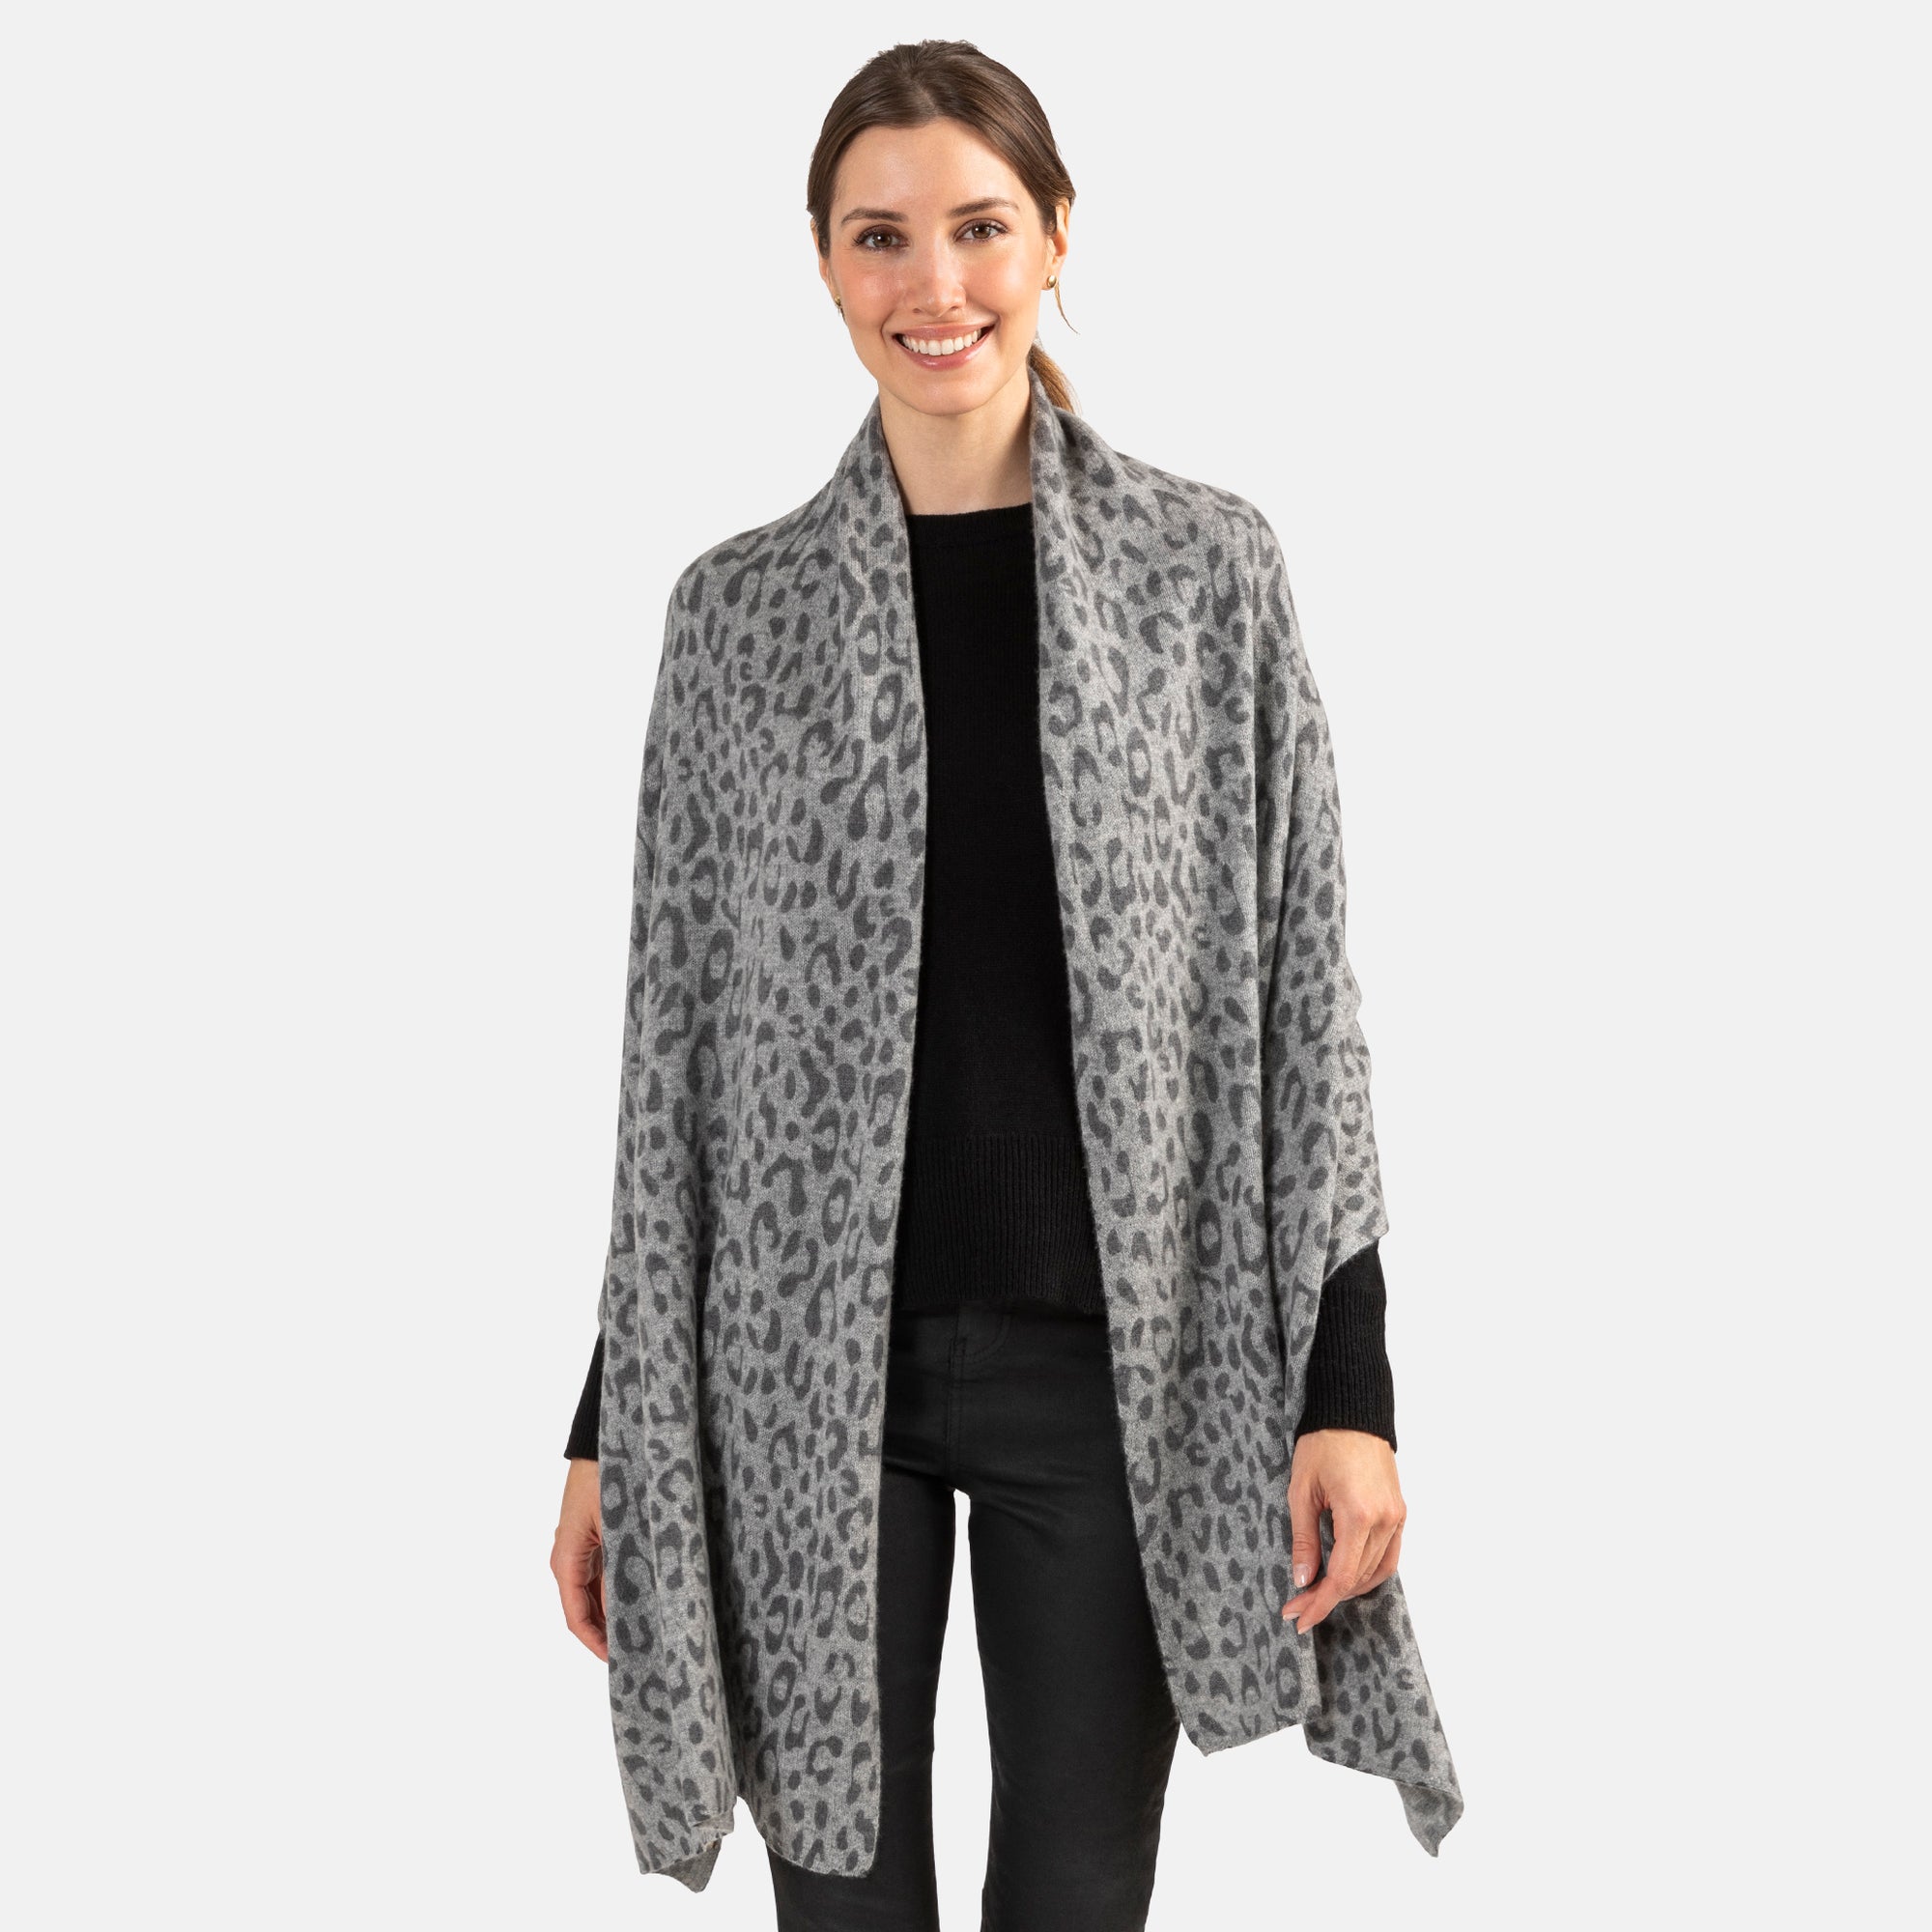 Picture of a woman wearing an oversized knitted cashmere travel wrap or scarf with a cheetah pattern in grey tones.